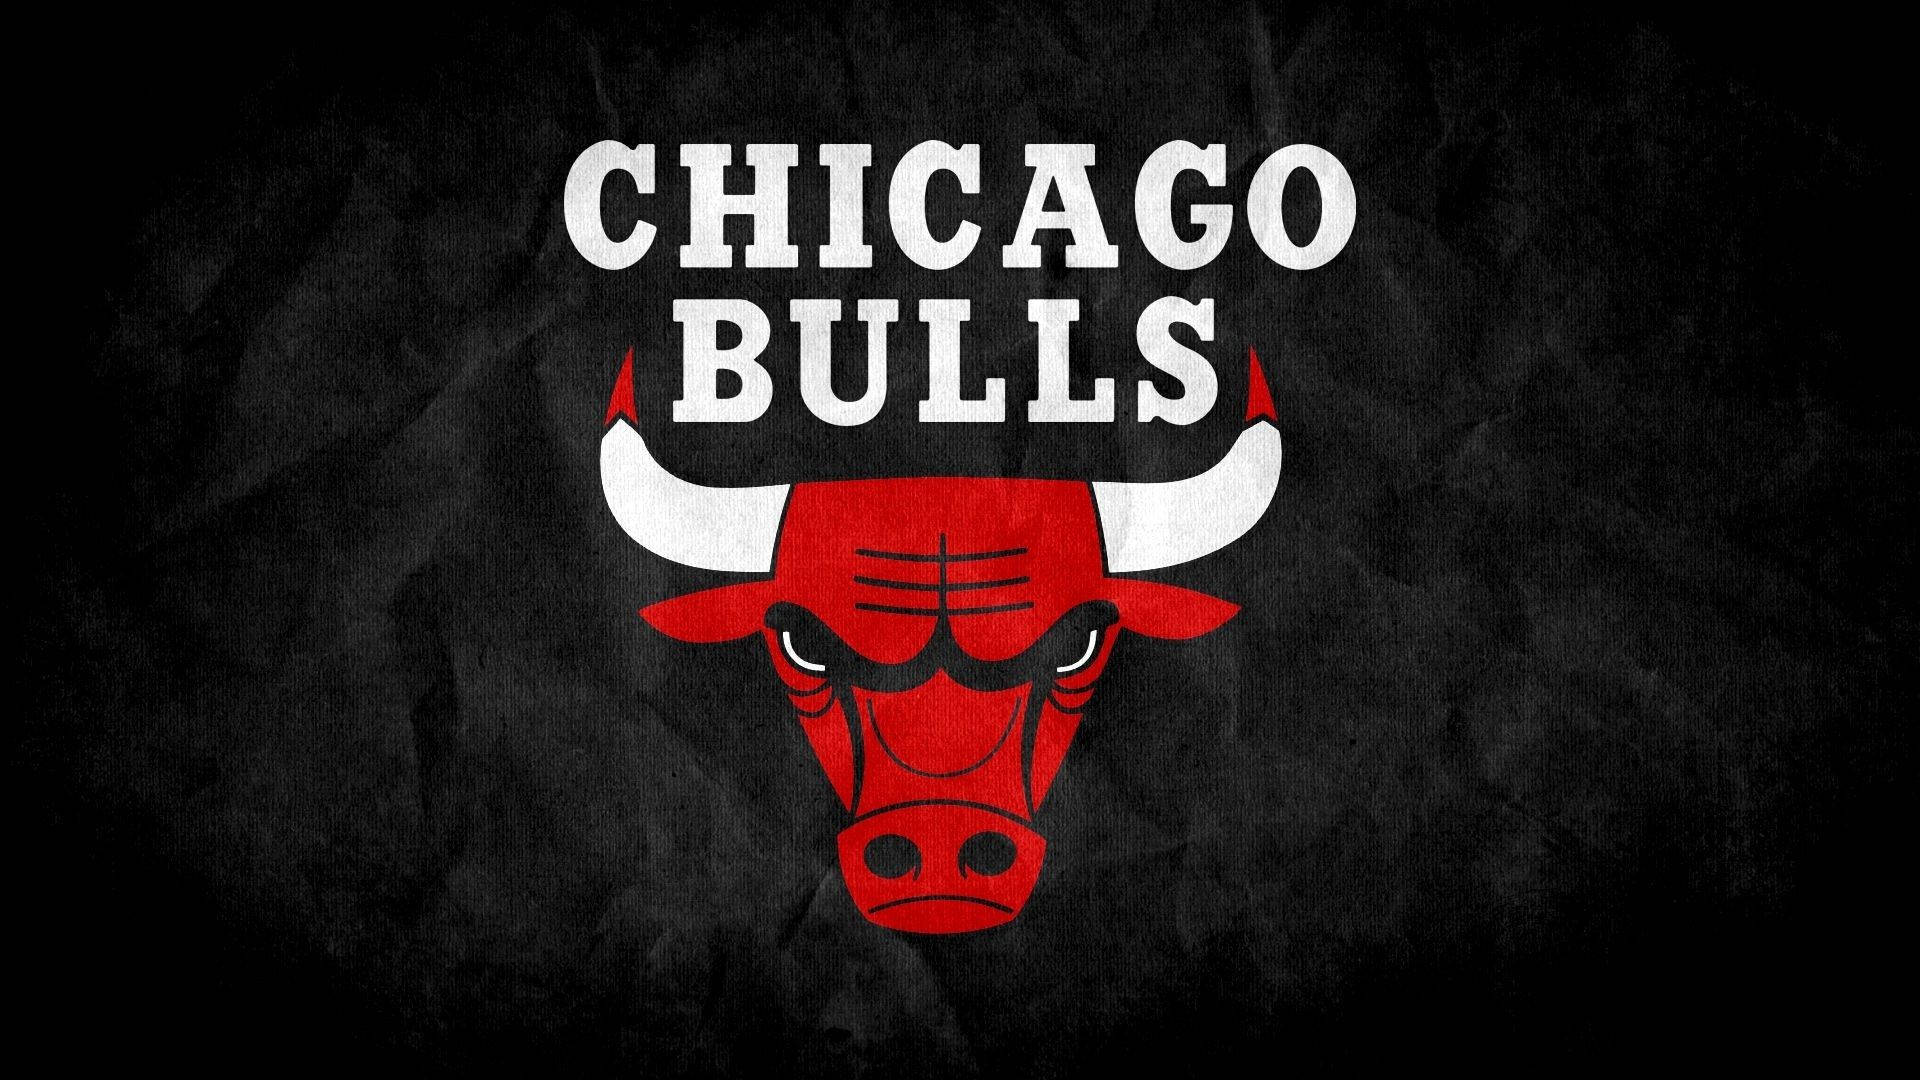 Free Chicago Bulls Wallpaper Downloads, [200+] Chicago Bulls Wallpapers for  FREE 